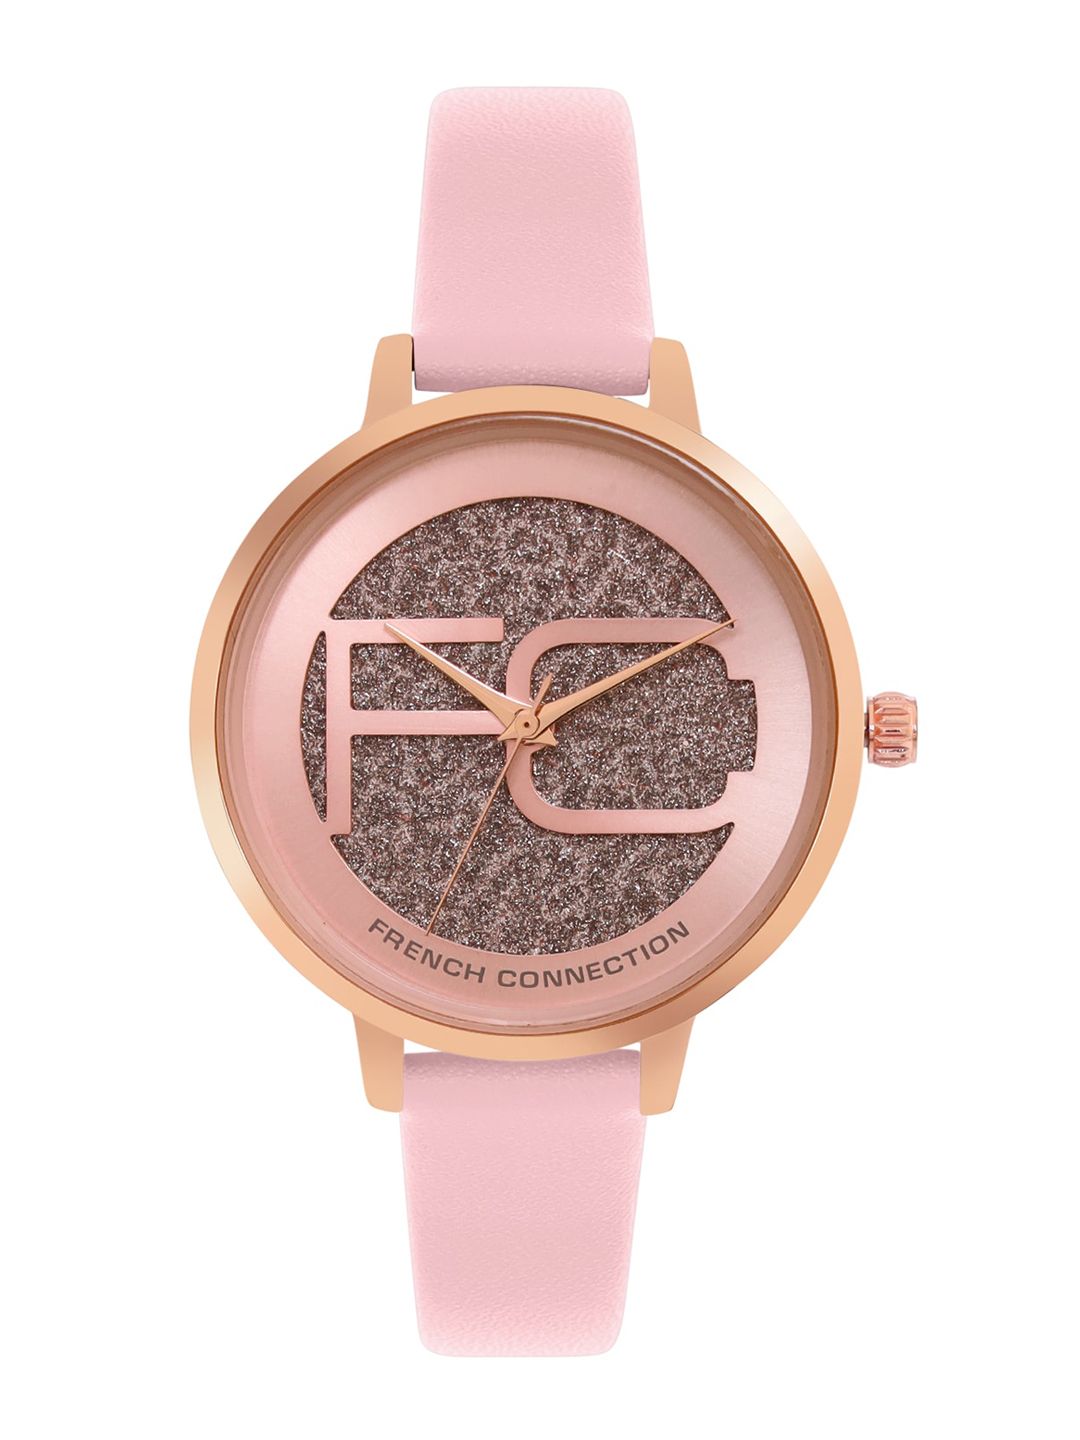 French Connection Women Rose Gold Embellished Dial Leather Straps Analogue Watch FC21-26C Price in India